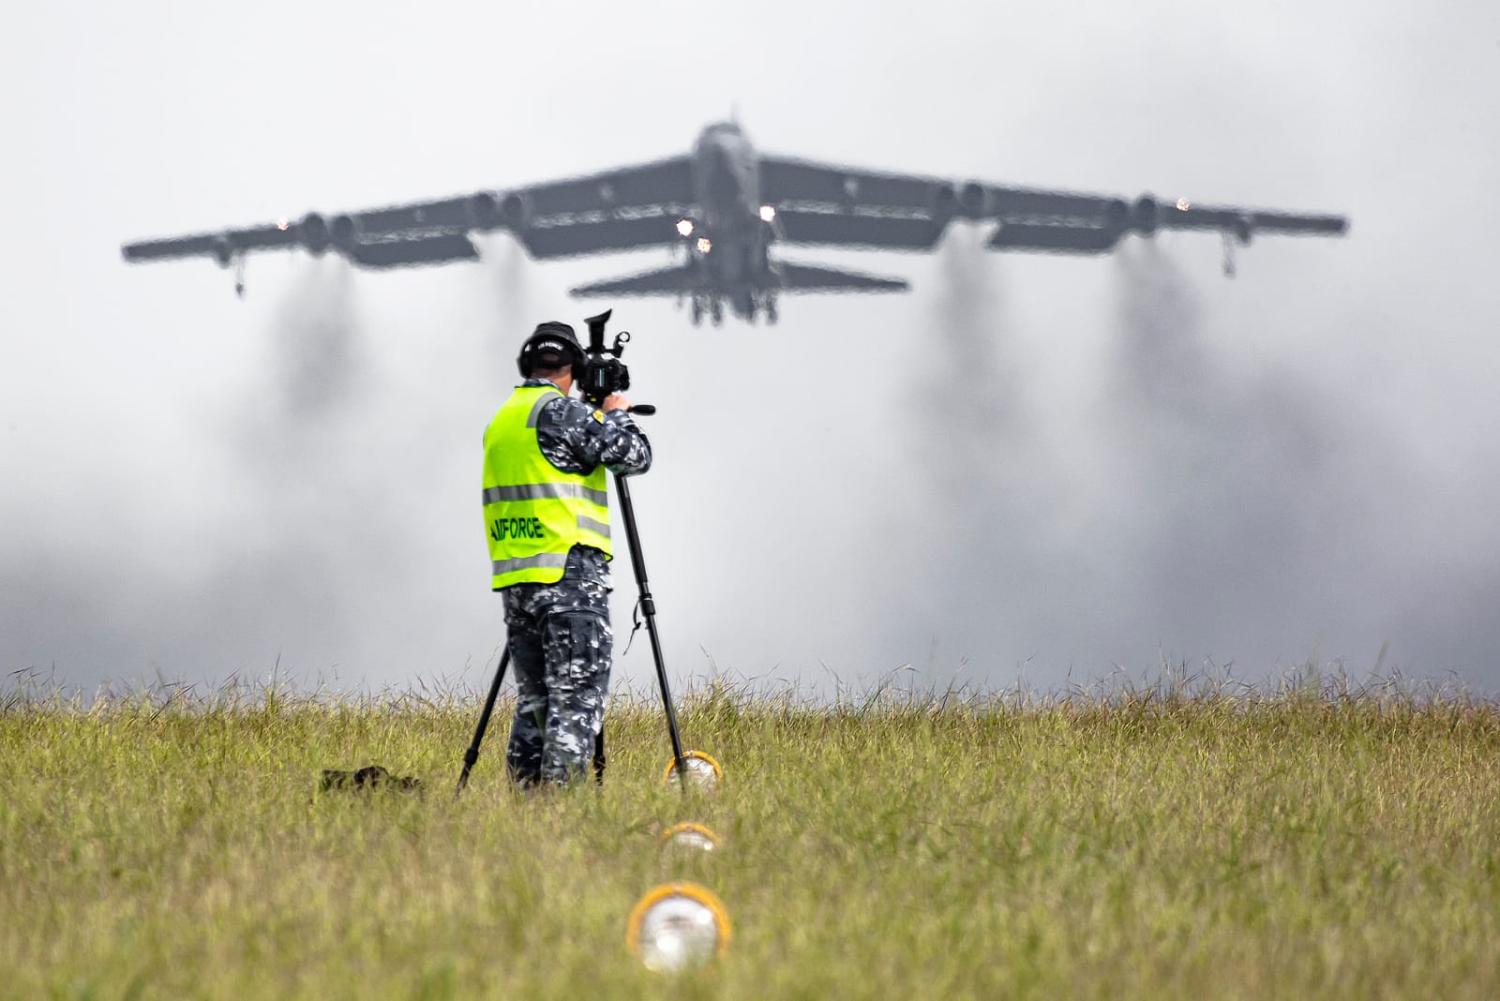 Photographing the take-off of a United States Air Force B-52 Bomber from RAAF Base Darwin during Exercise Diamond Storm in 2019 (Defence Department)